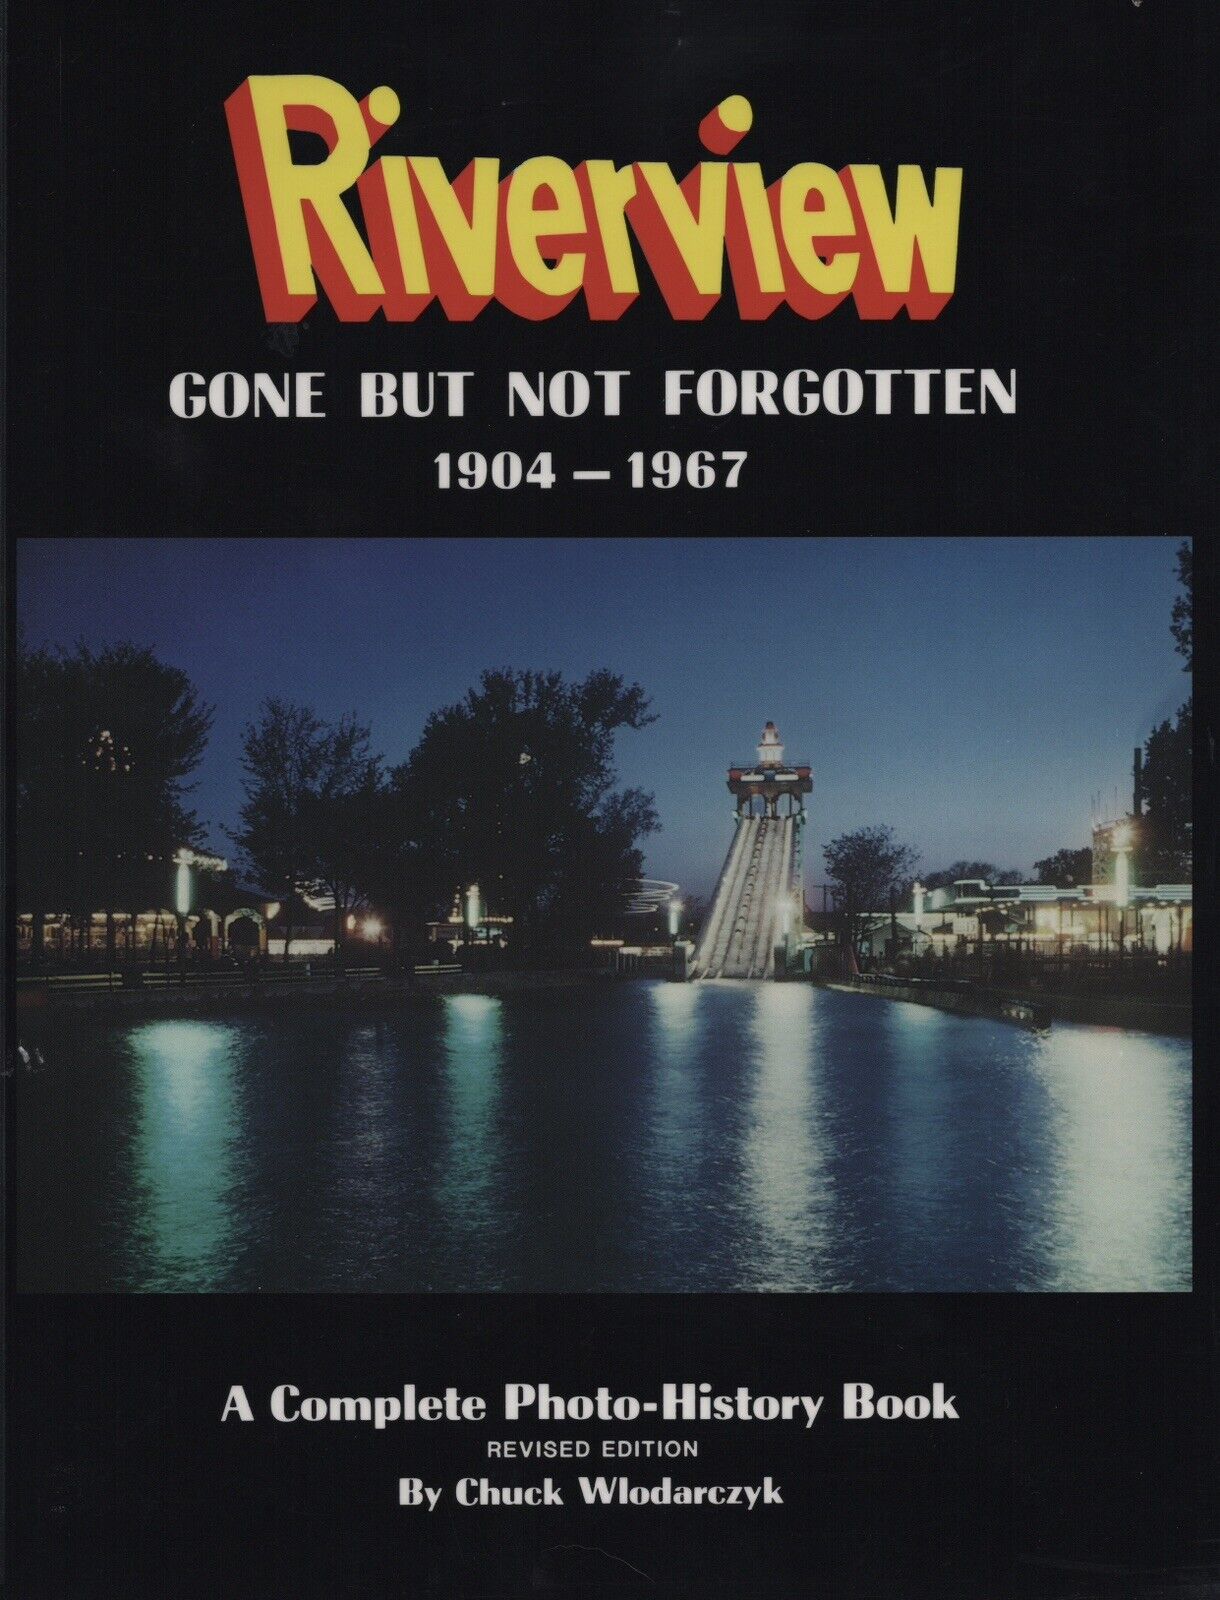 Chicago Riverview-NOS. Riverview, Gone But Not Forgotten